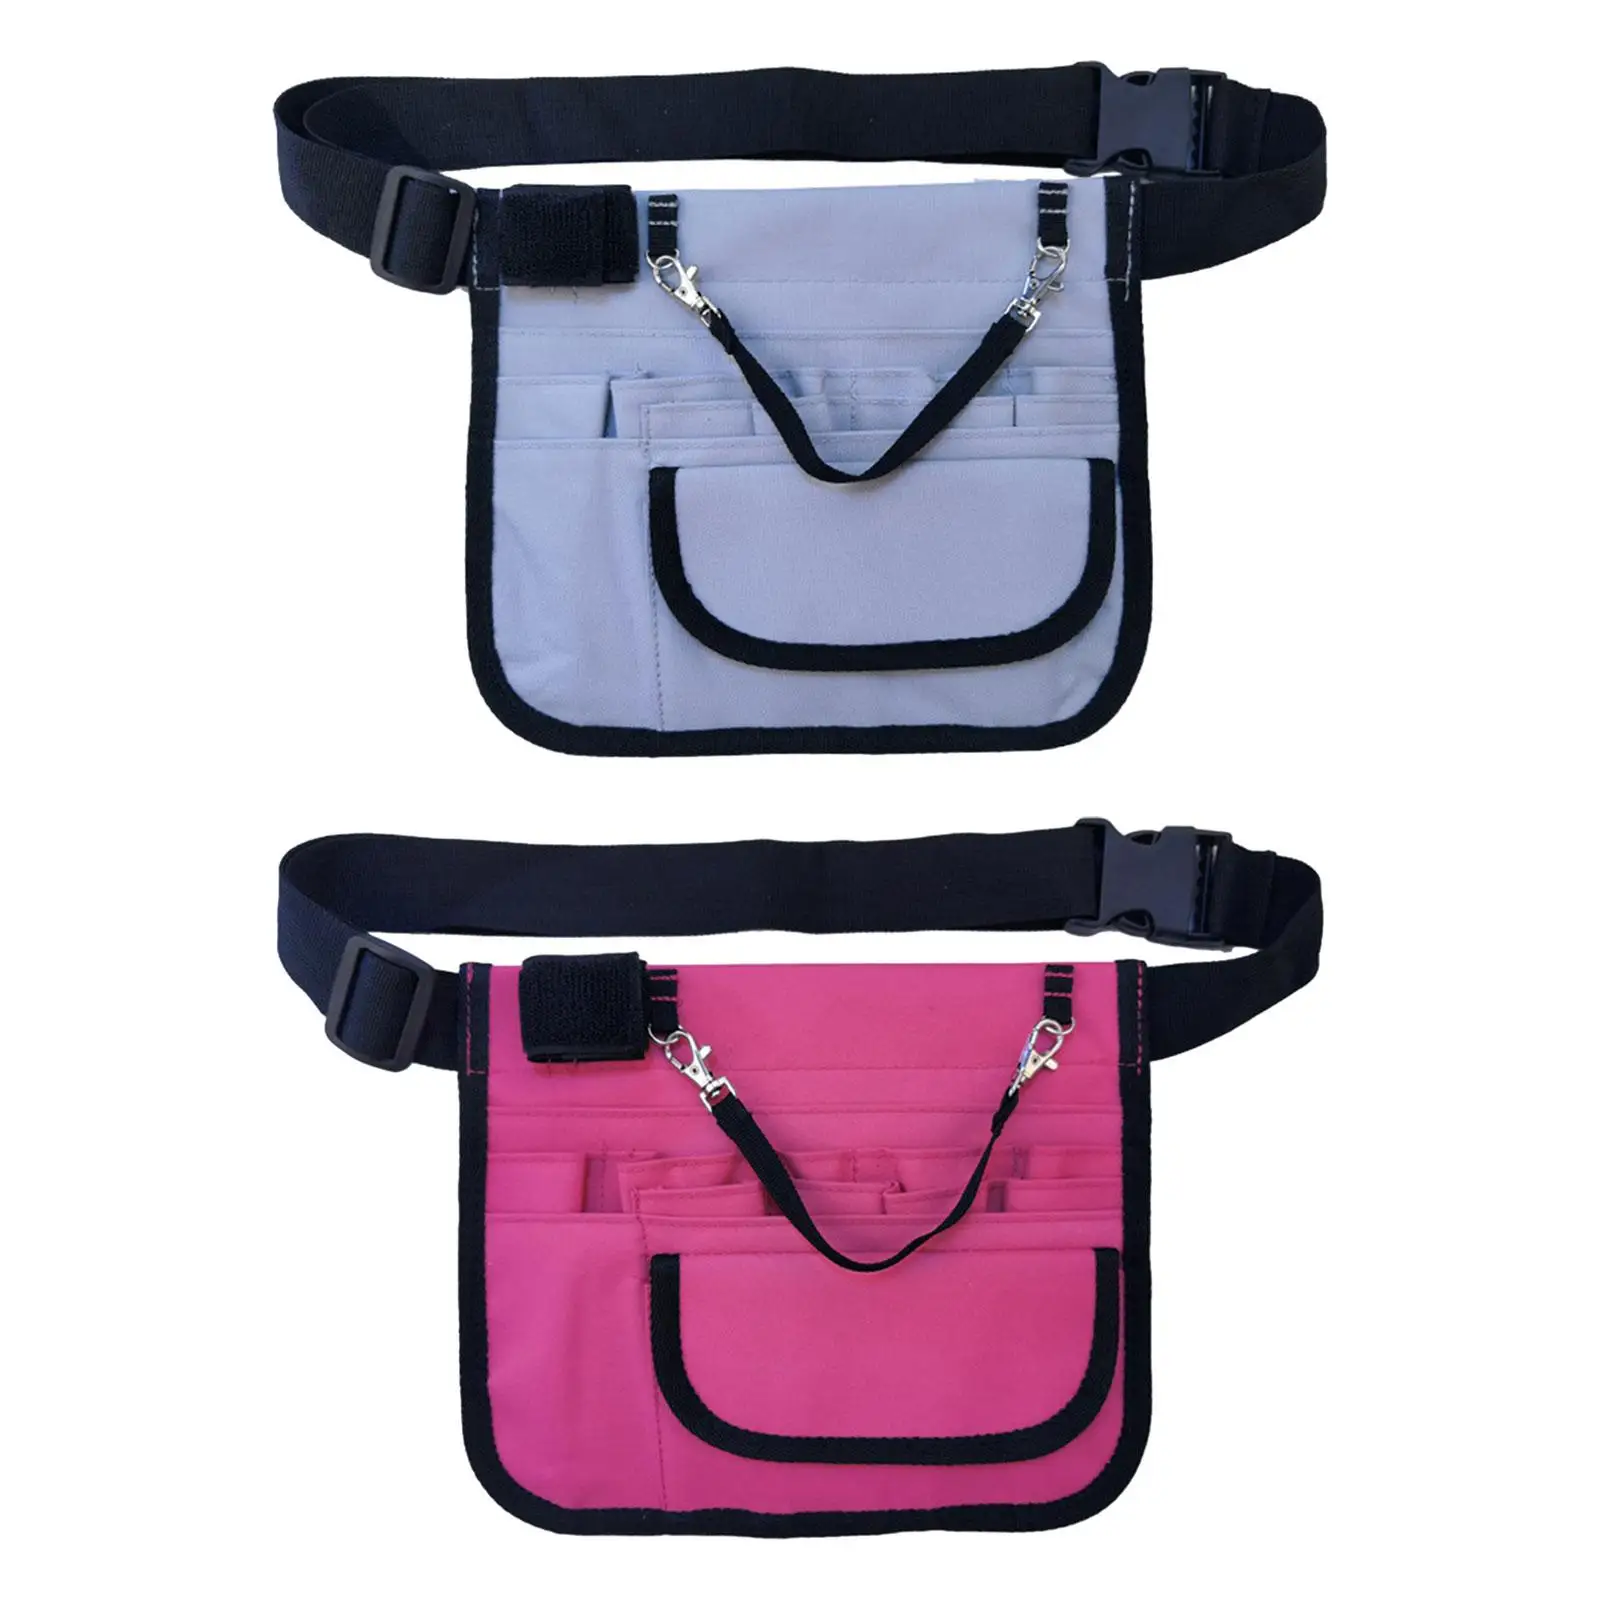 Nurses Pouch Waist Bag Tool Case Adjustable Pouch with Tape Holder Utility Belt Hip Bag Fanny Pack for Accessories Hospital